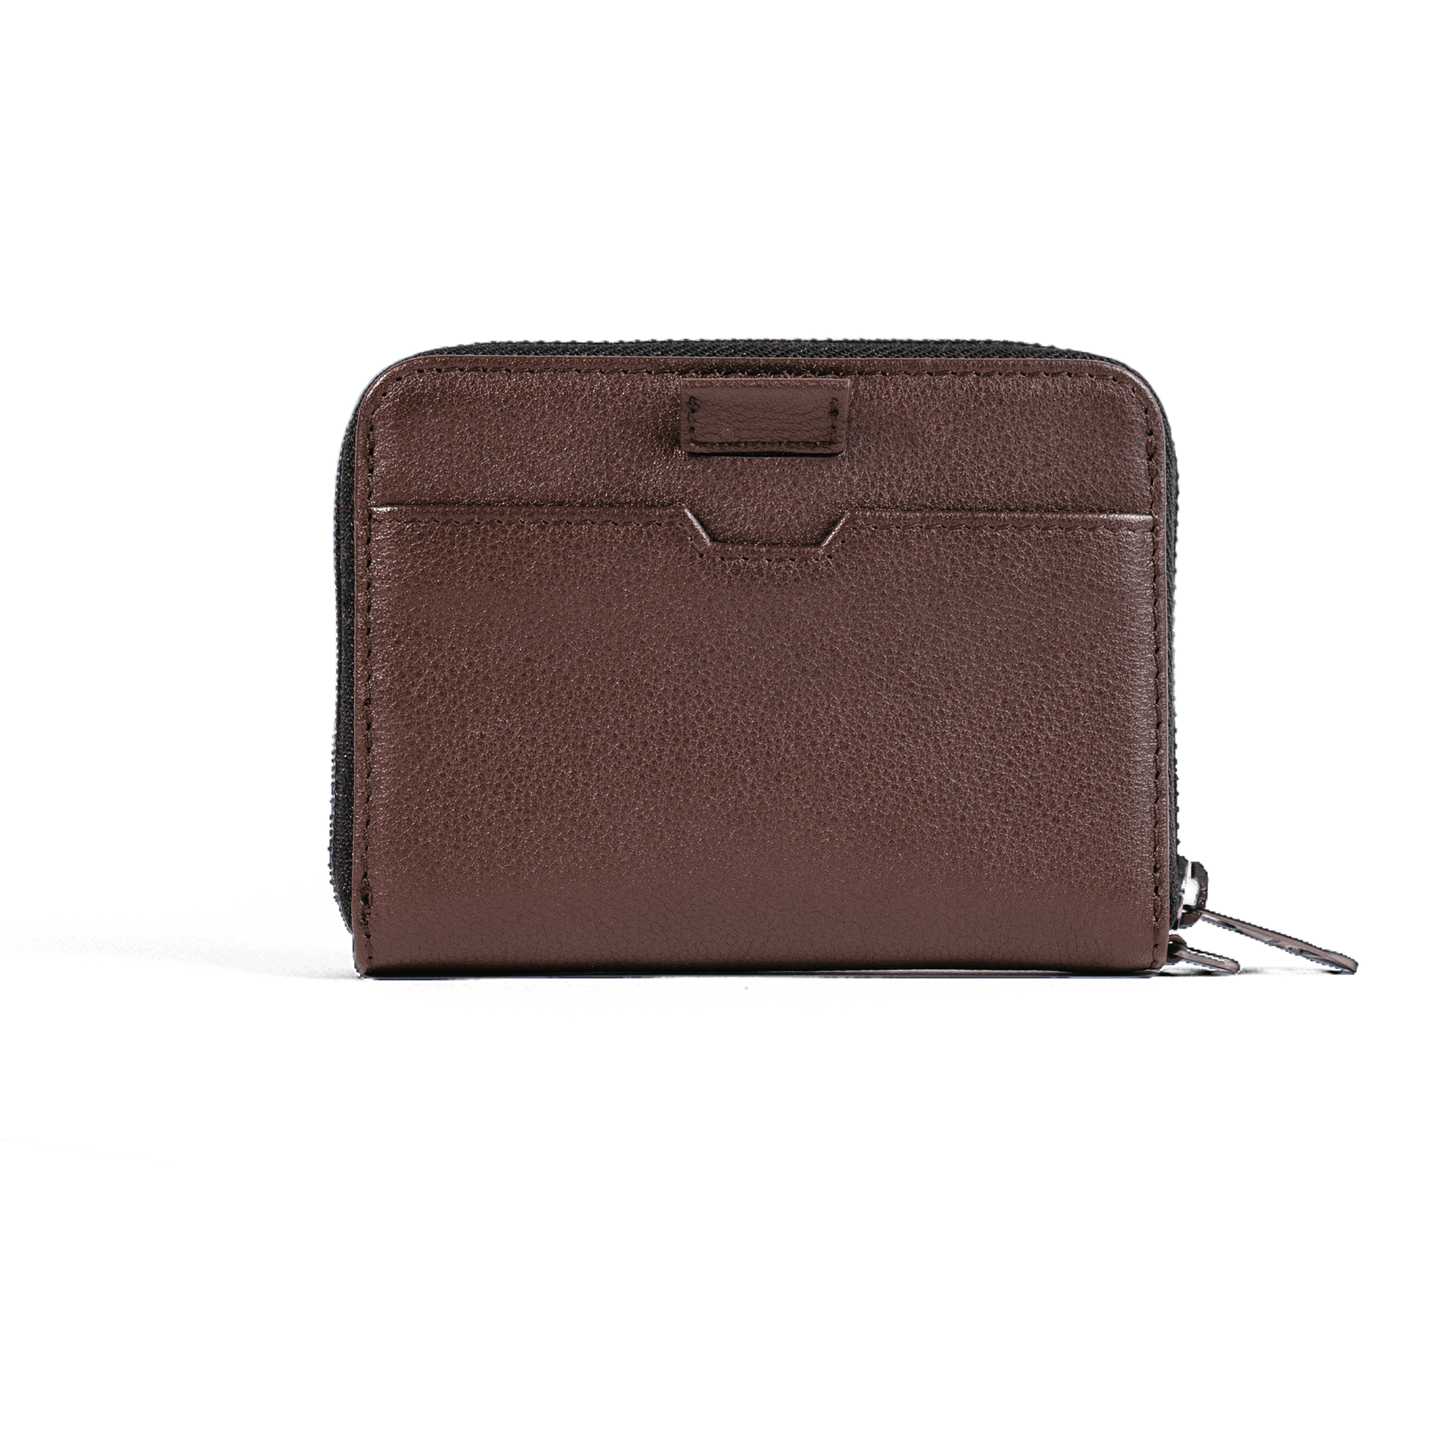 Mayfair wallet with cash compartment